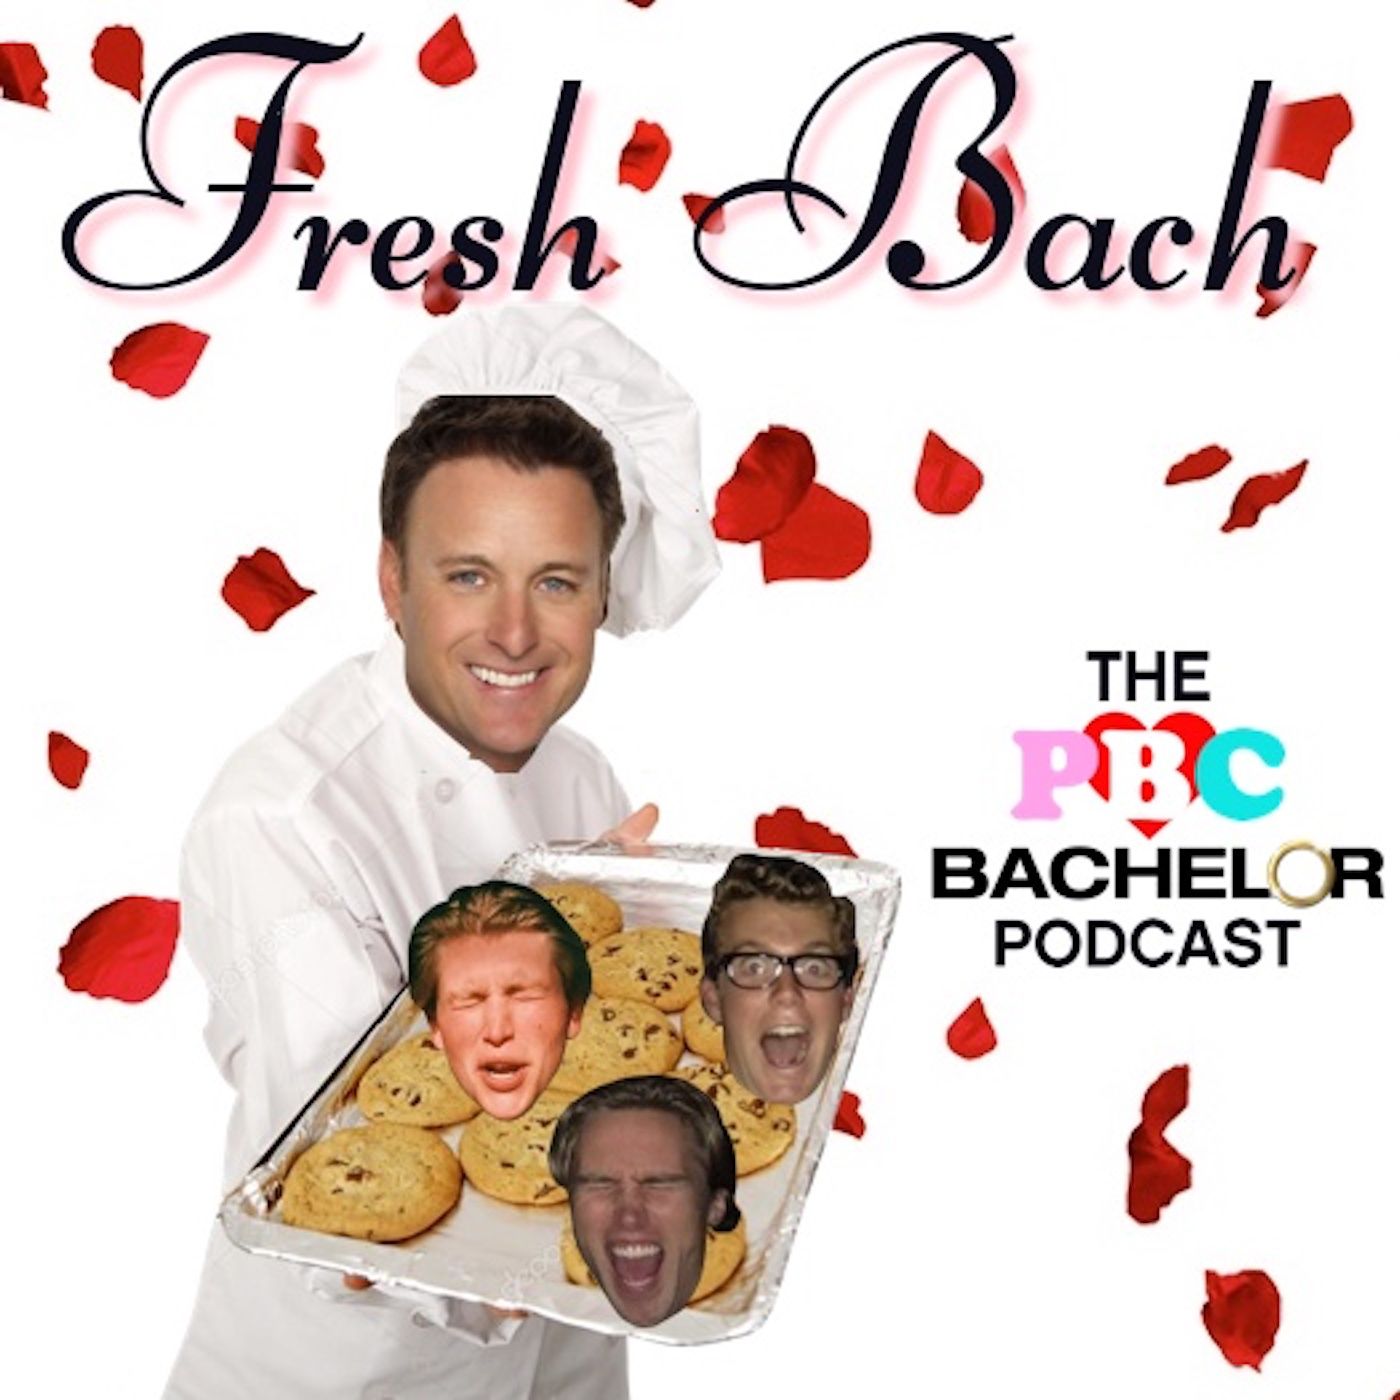 Artwork for the podcast Fresh Bach